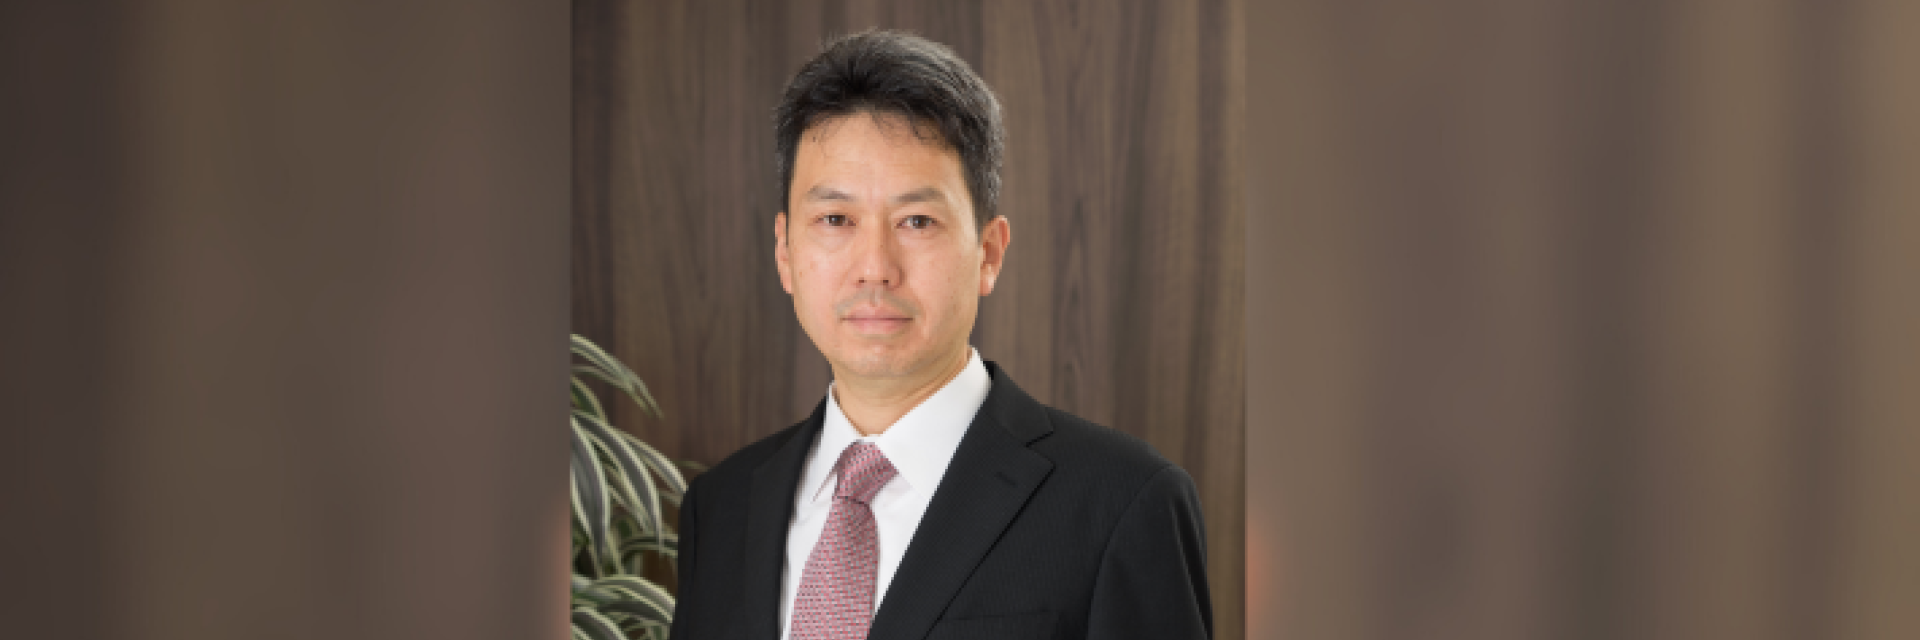 BELFOR Appoints New Country Manager for Japan